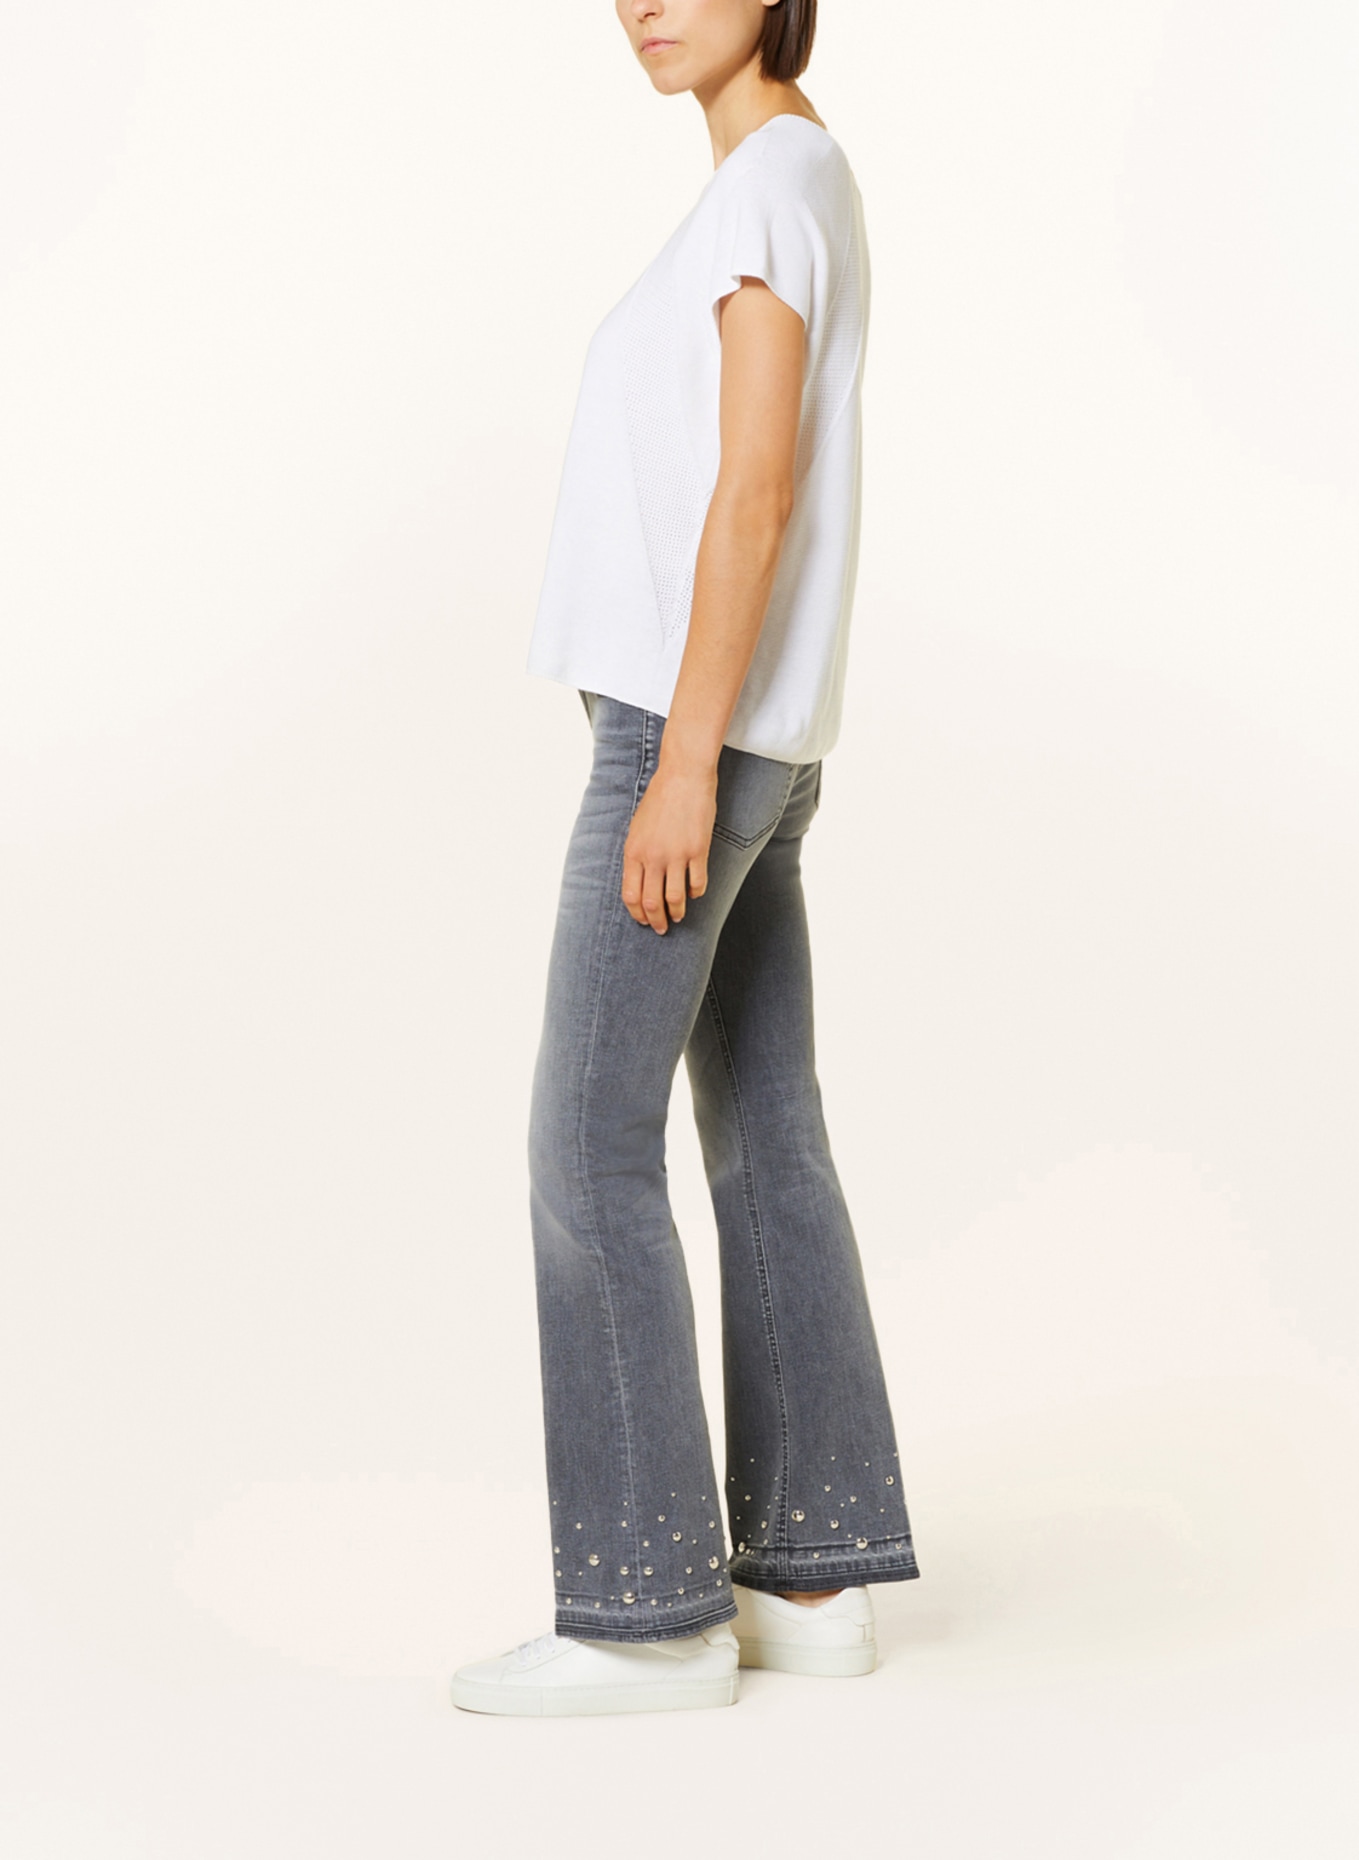 CAMBIO Flared jeans PARIS with rivets, Color: 5241 feminin contrast used ope (Image 4)